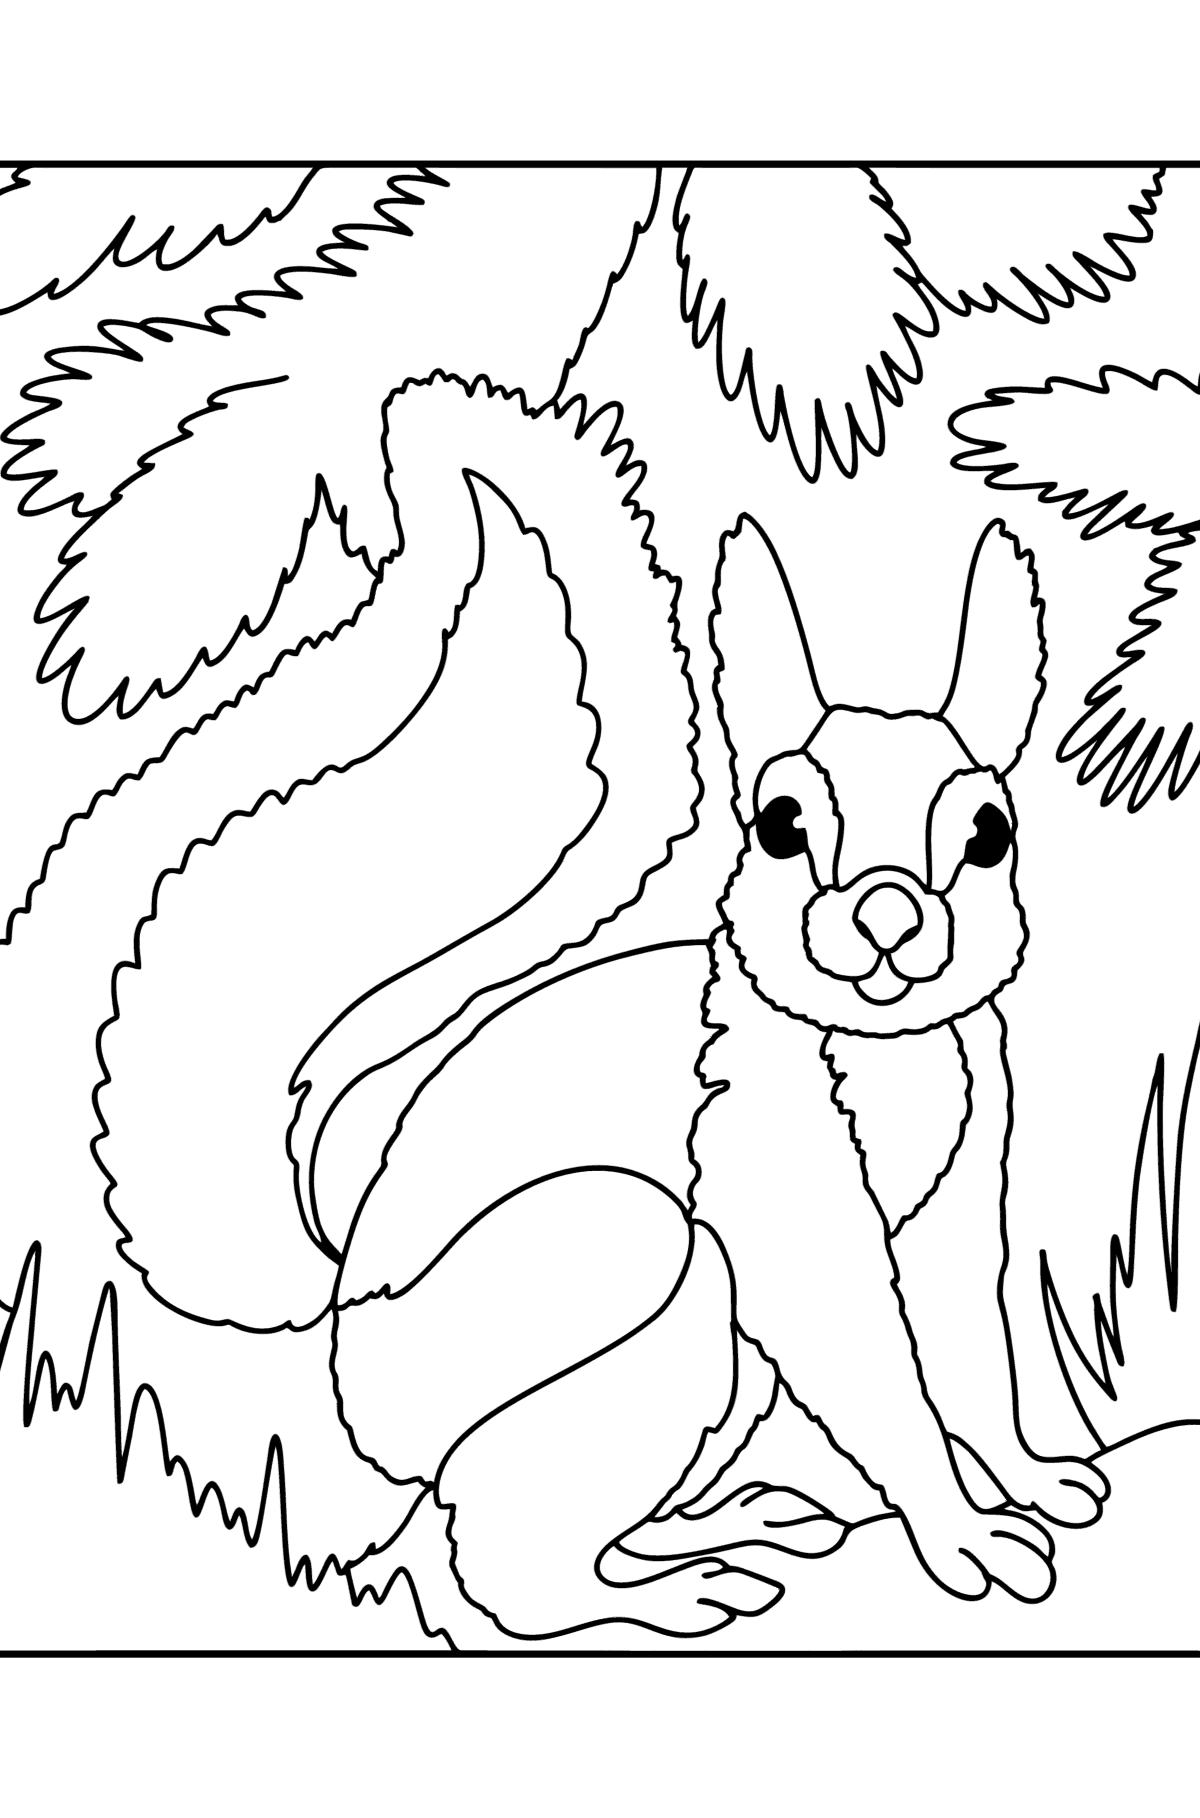 Squirrel сoloring page - Coloring Pages for Kids